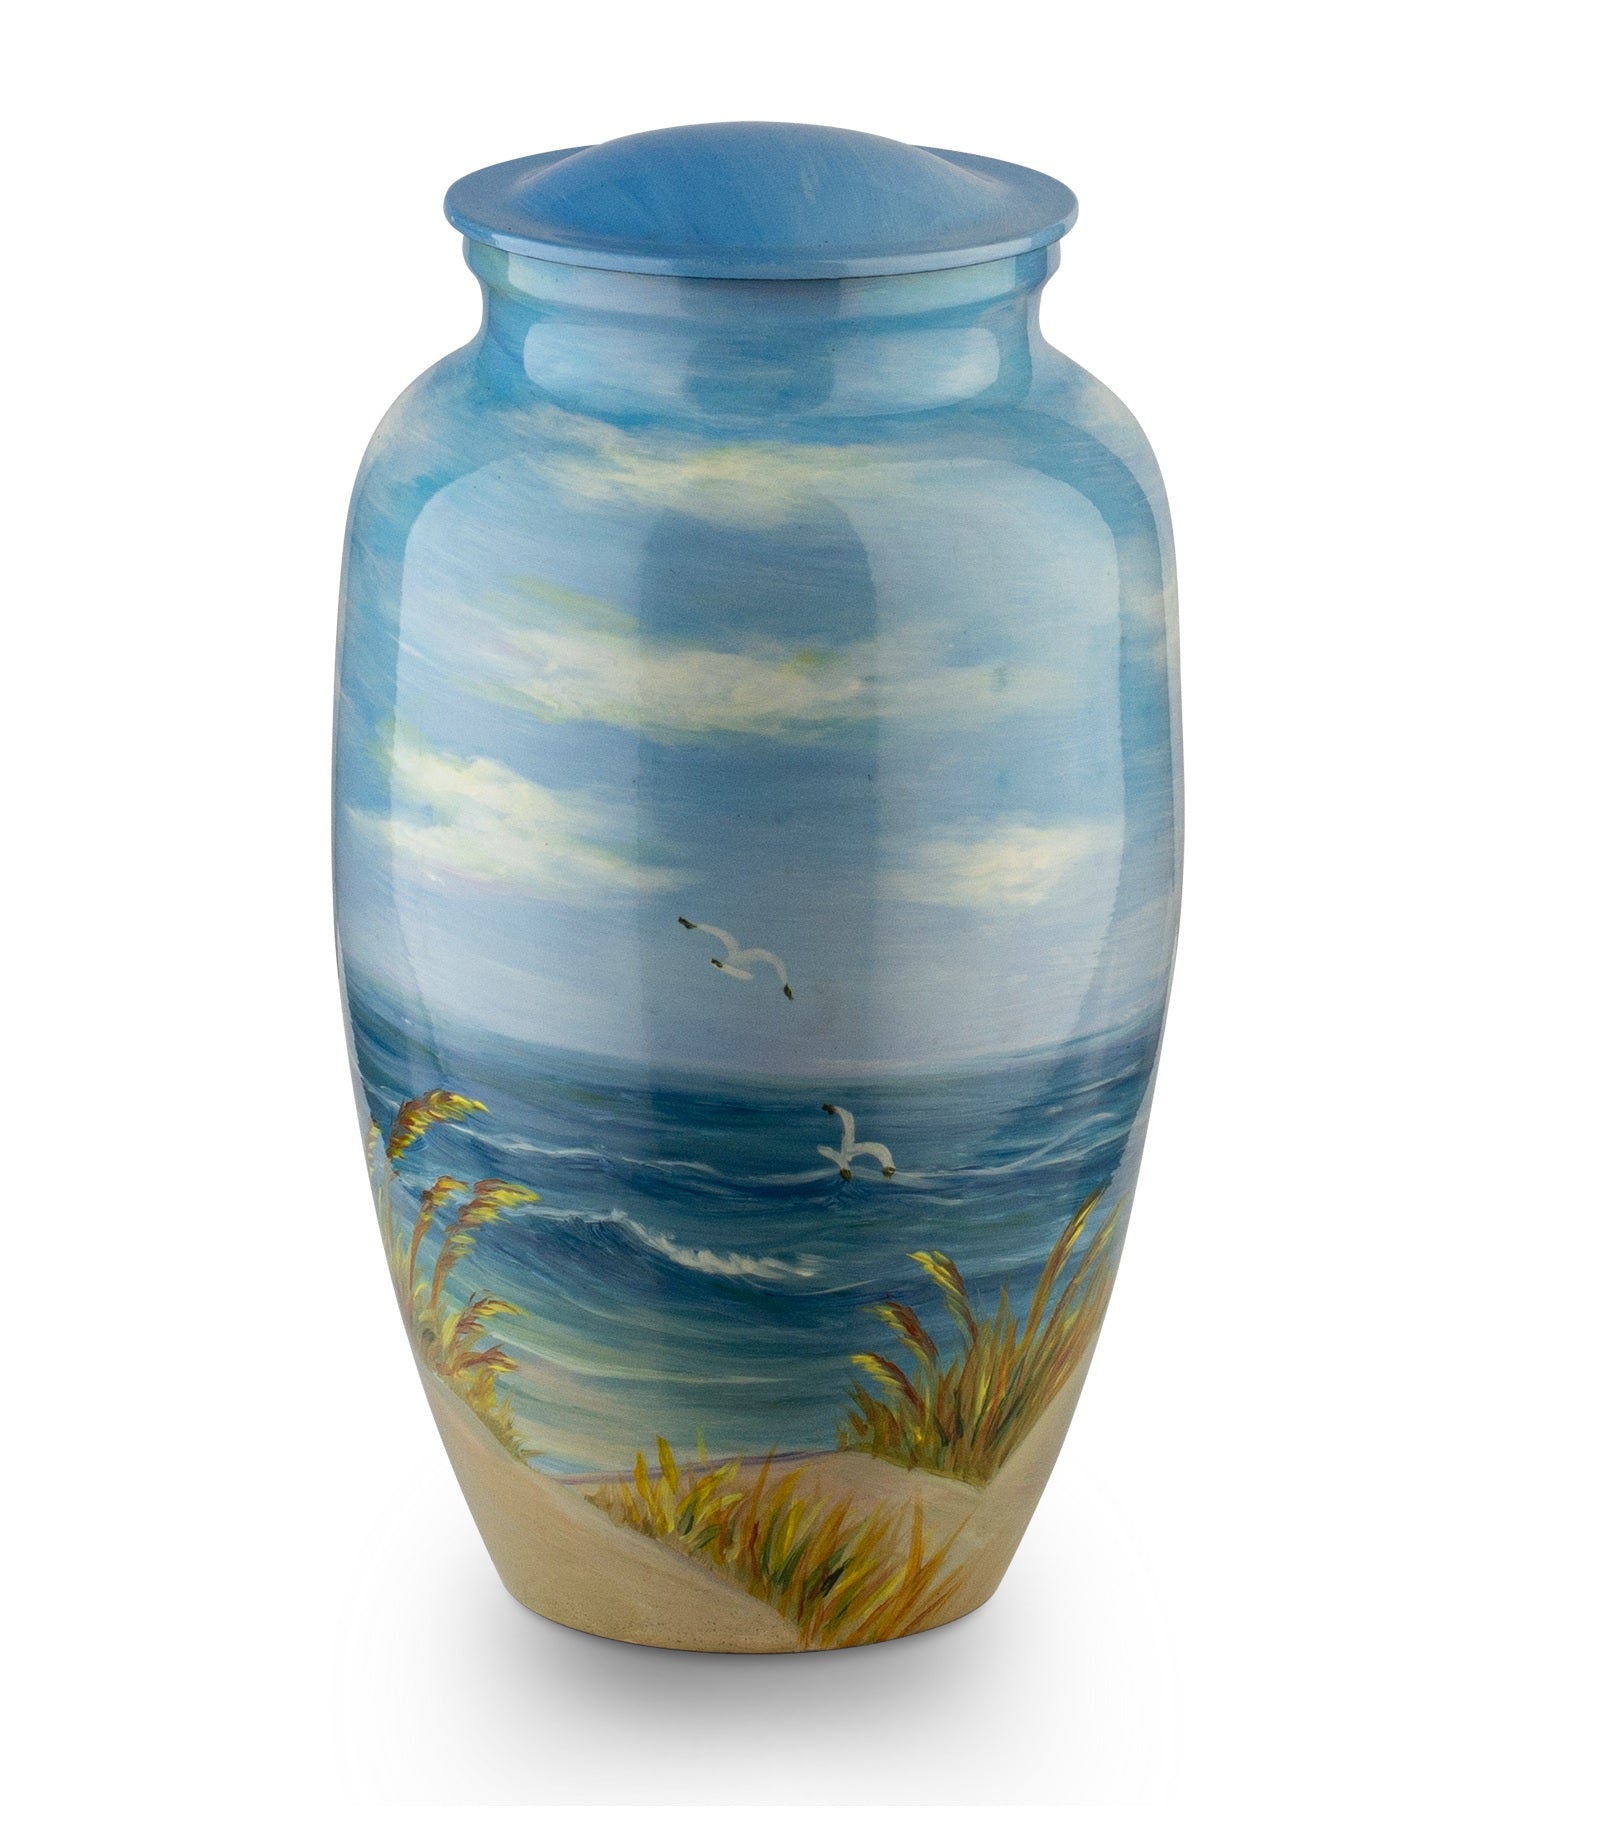 Beach Urn for Ashes with Dunes Ocean blue skies